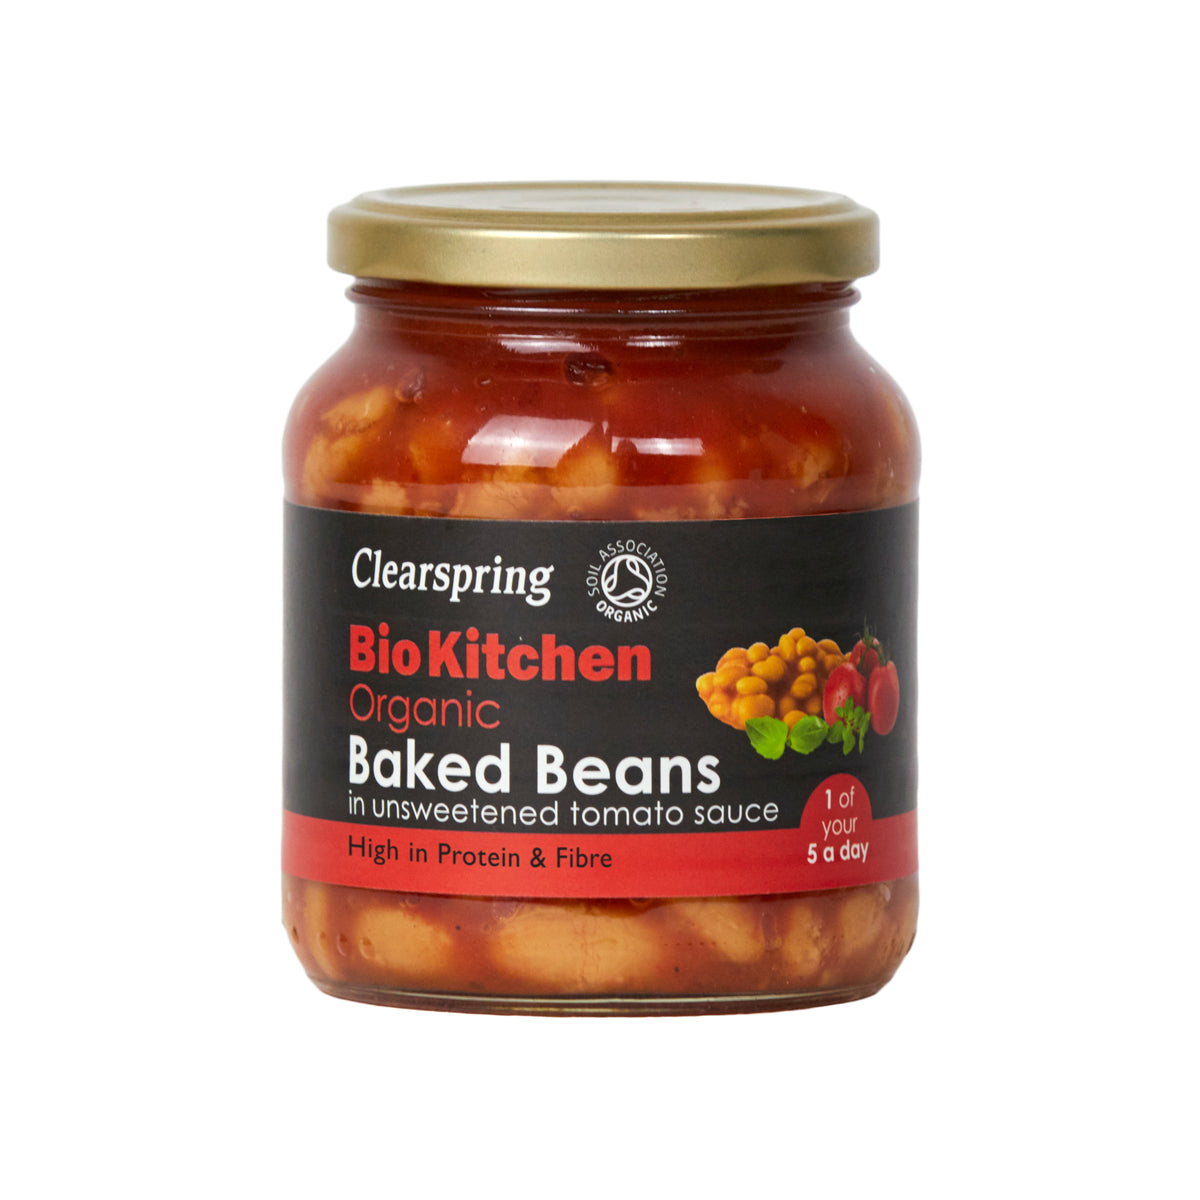 Organic Baked Beans In Unsweetened Tomato Sauce (350G)